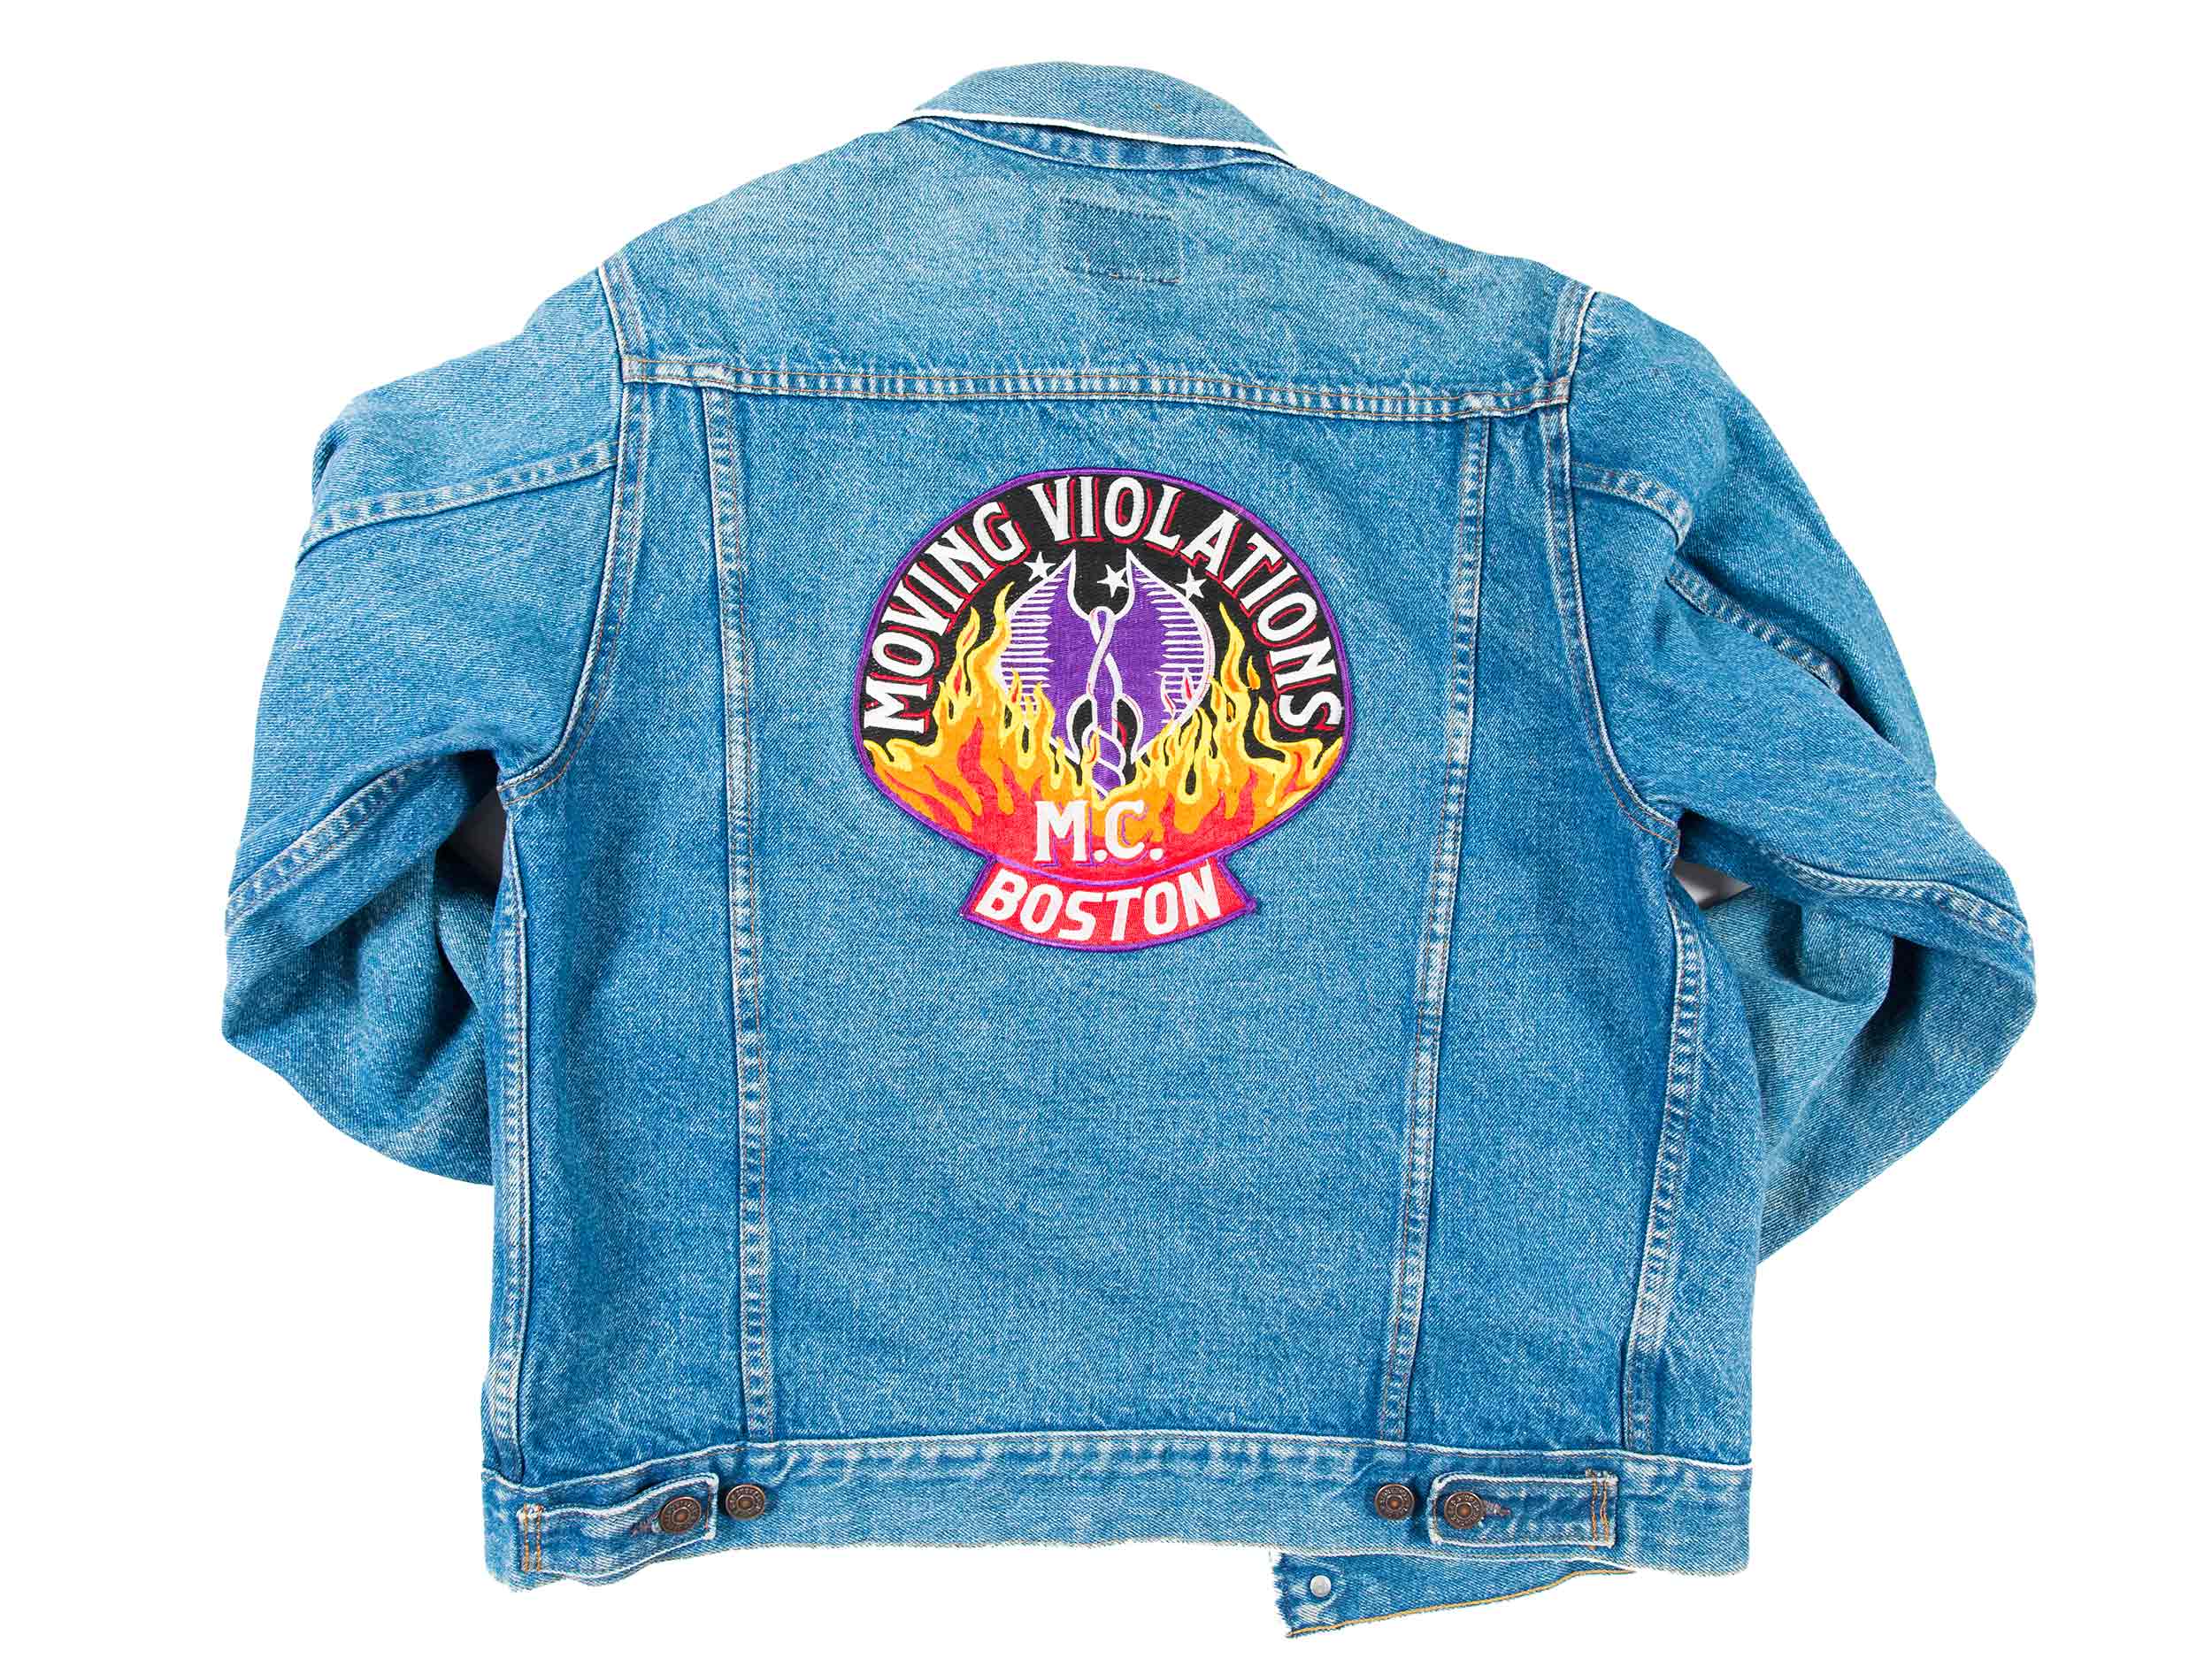 Moving Violations Motorcycle Club embroidered denim jacket, ca. 1985